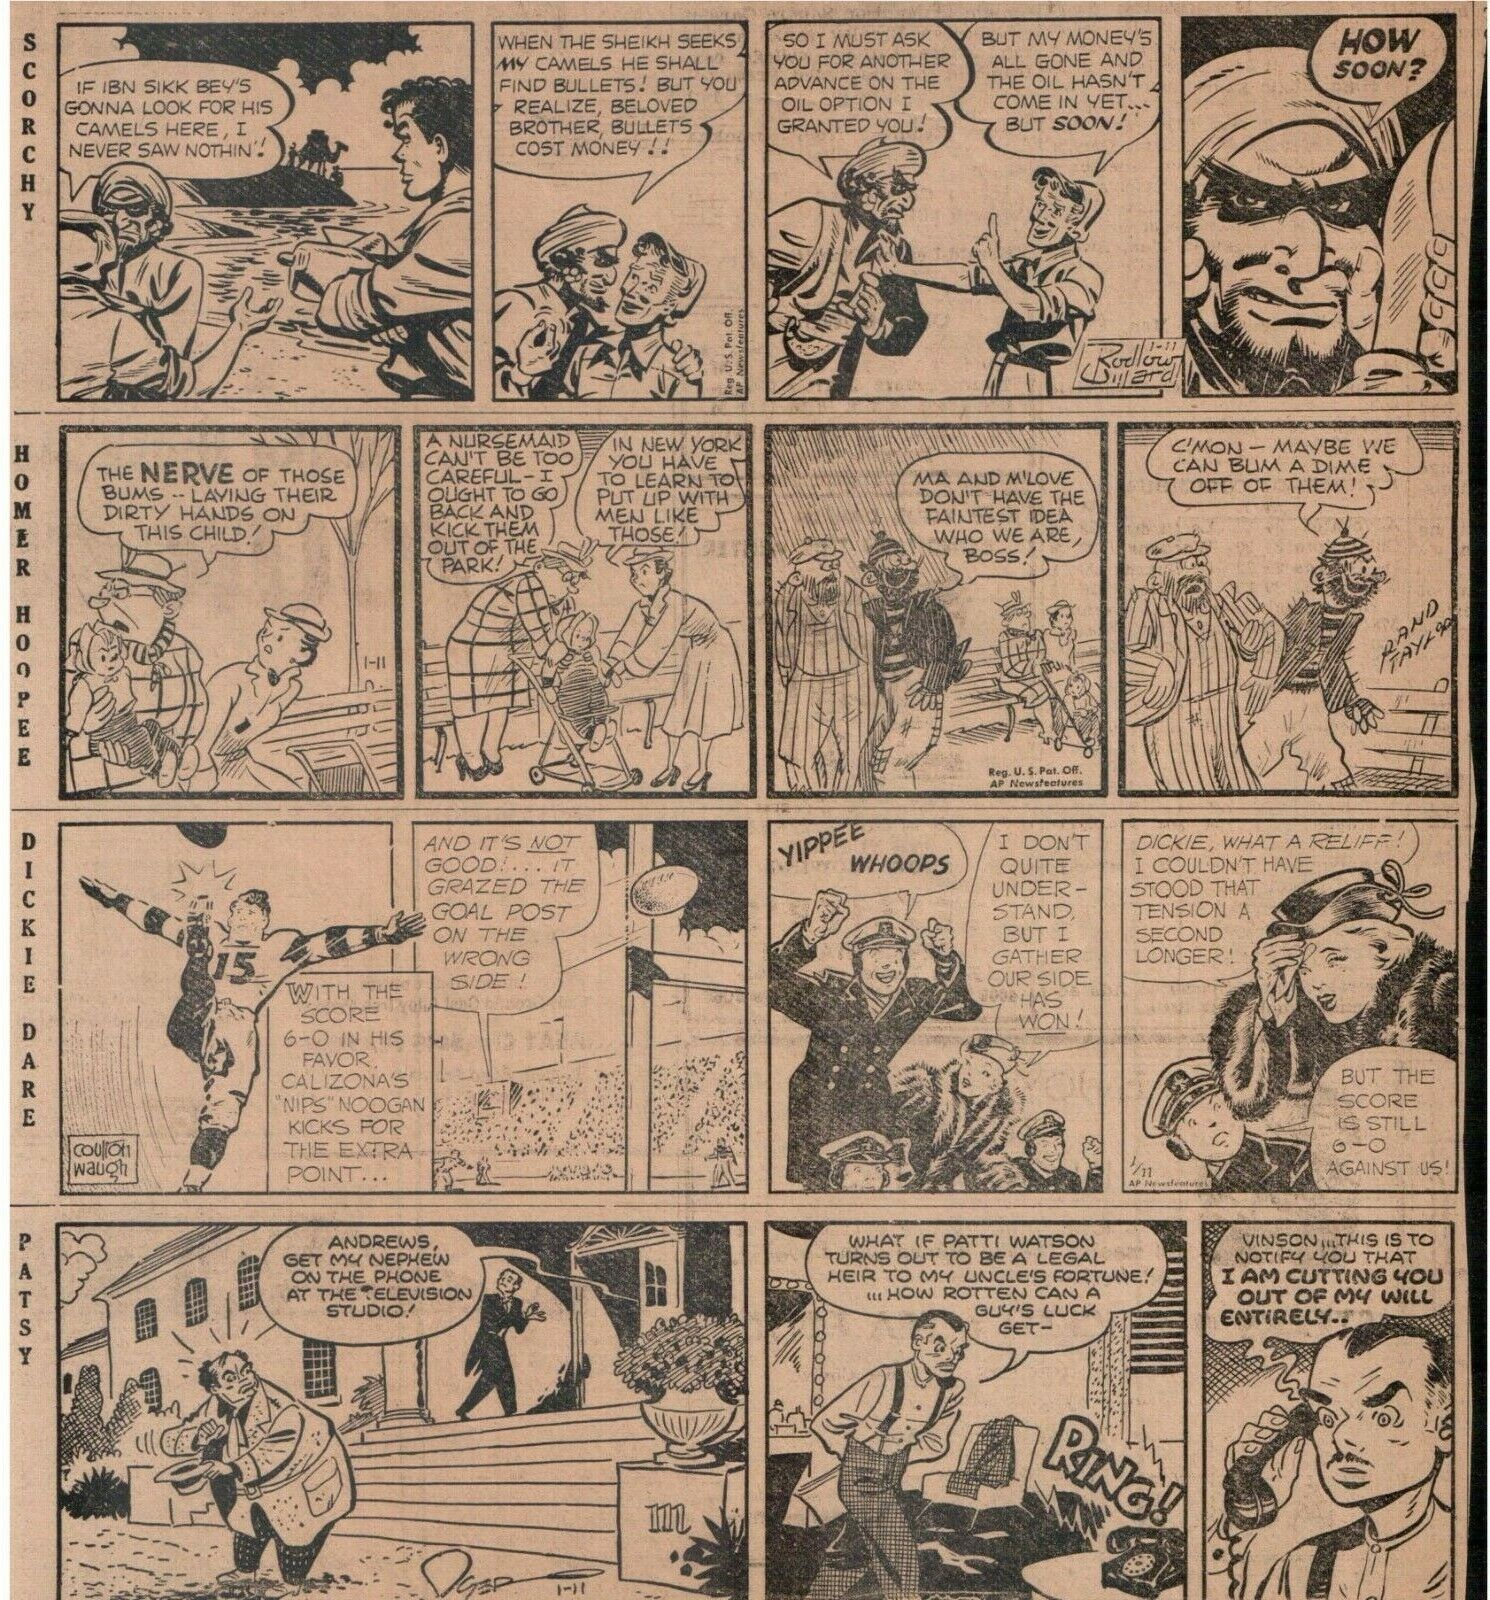 1/11/51 Scorchy/Dickie Dare/Homer Hoopee/Patsy Daily Newspaper Comic Strips 